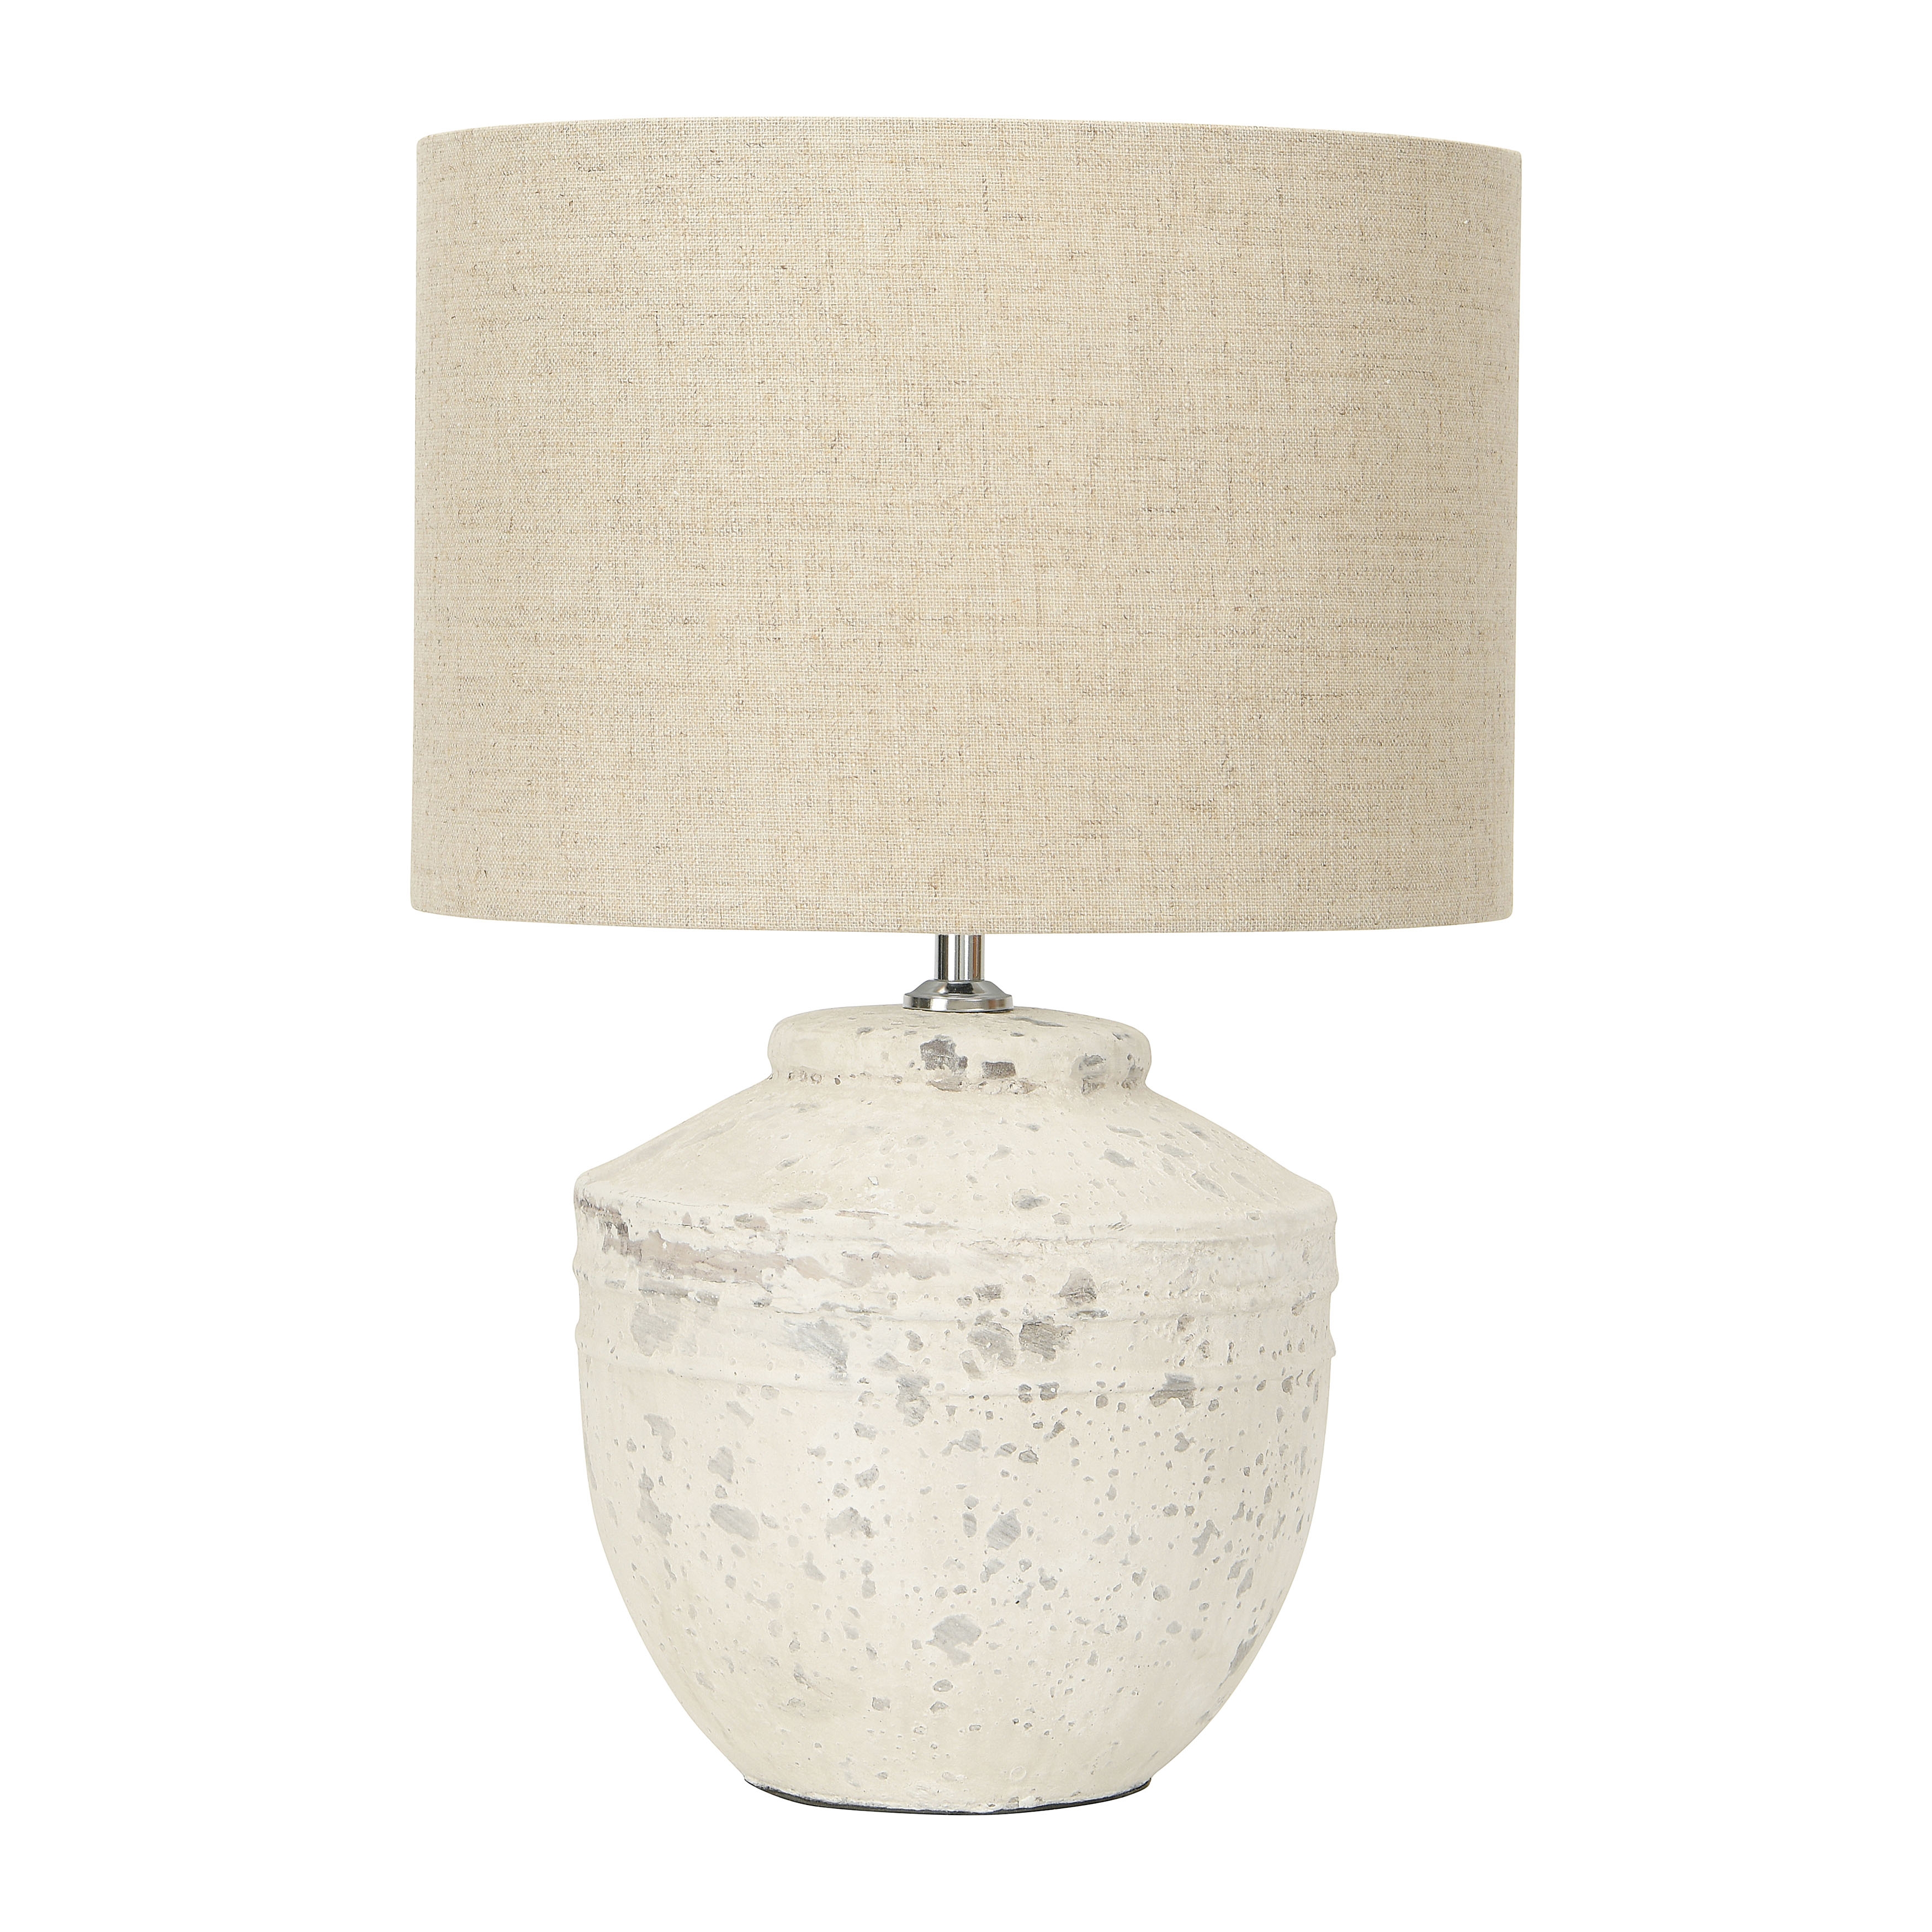 19.25 in Cement Table Lamp with Linen Shade - Image 0